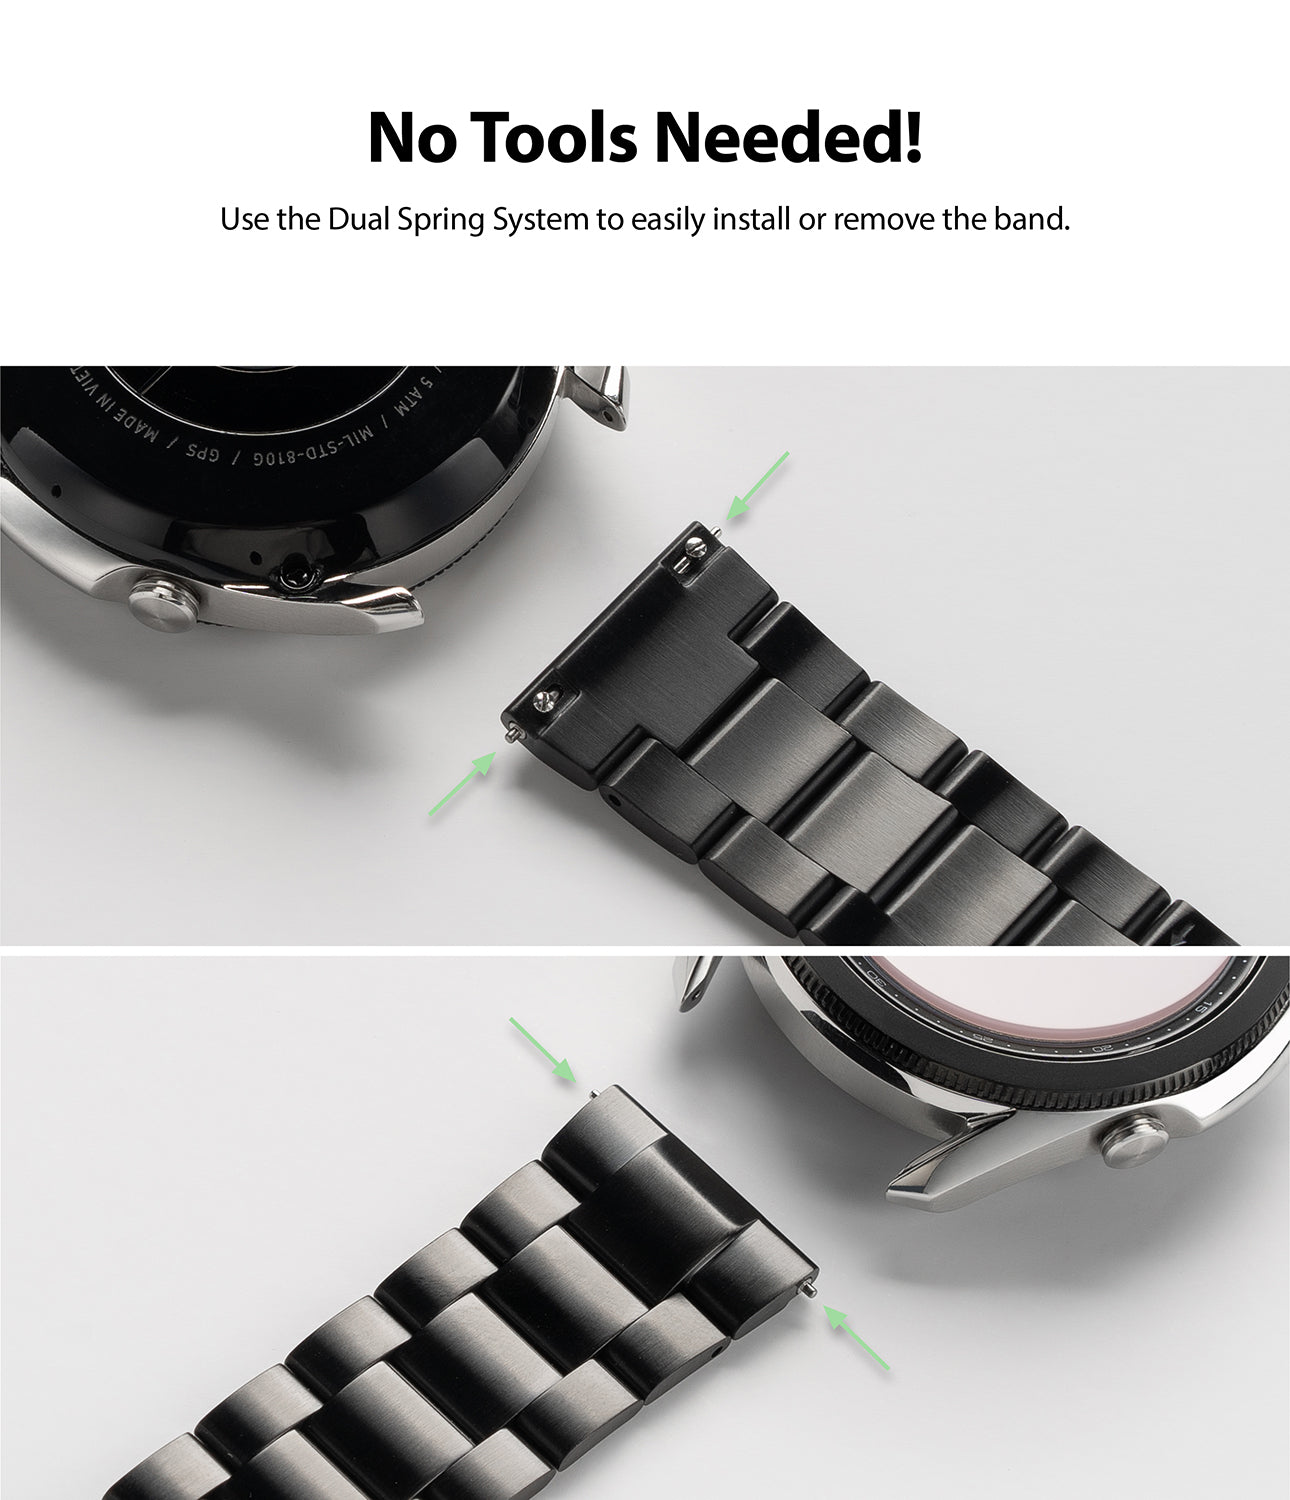 use the dual spring system to easily install or remove the band